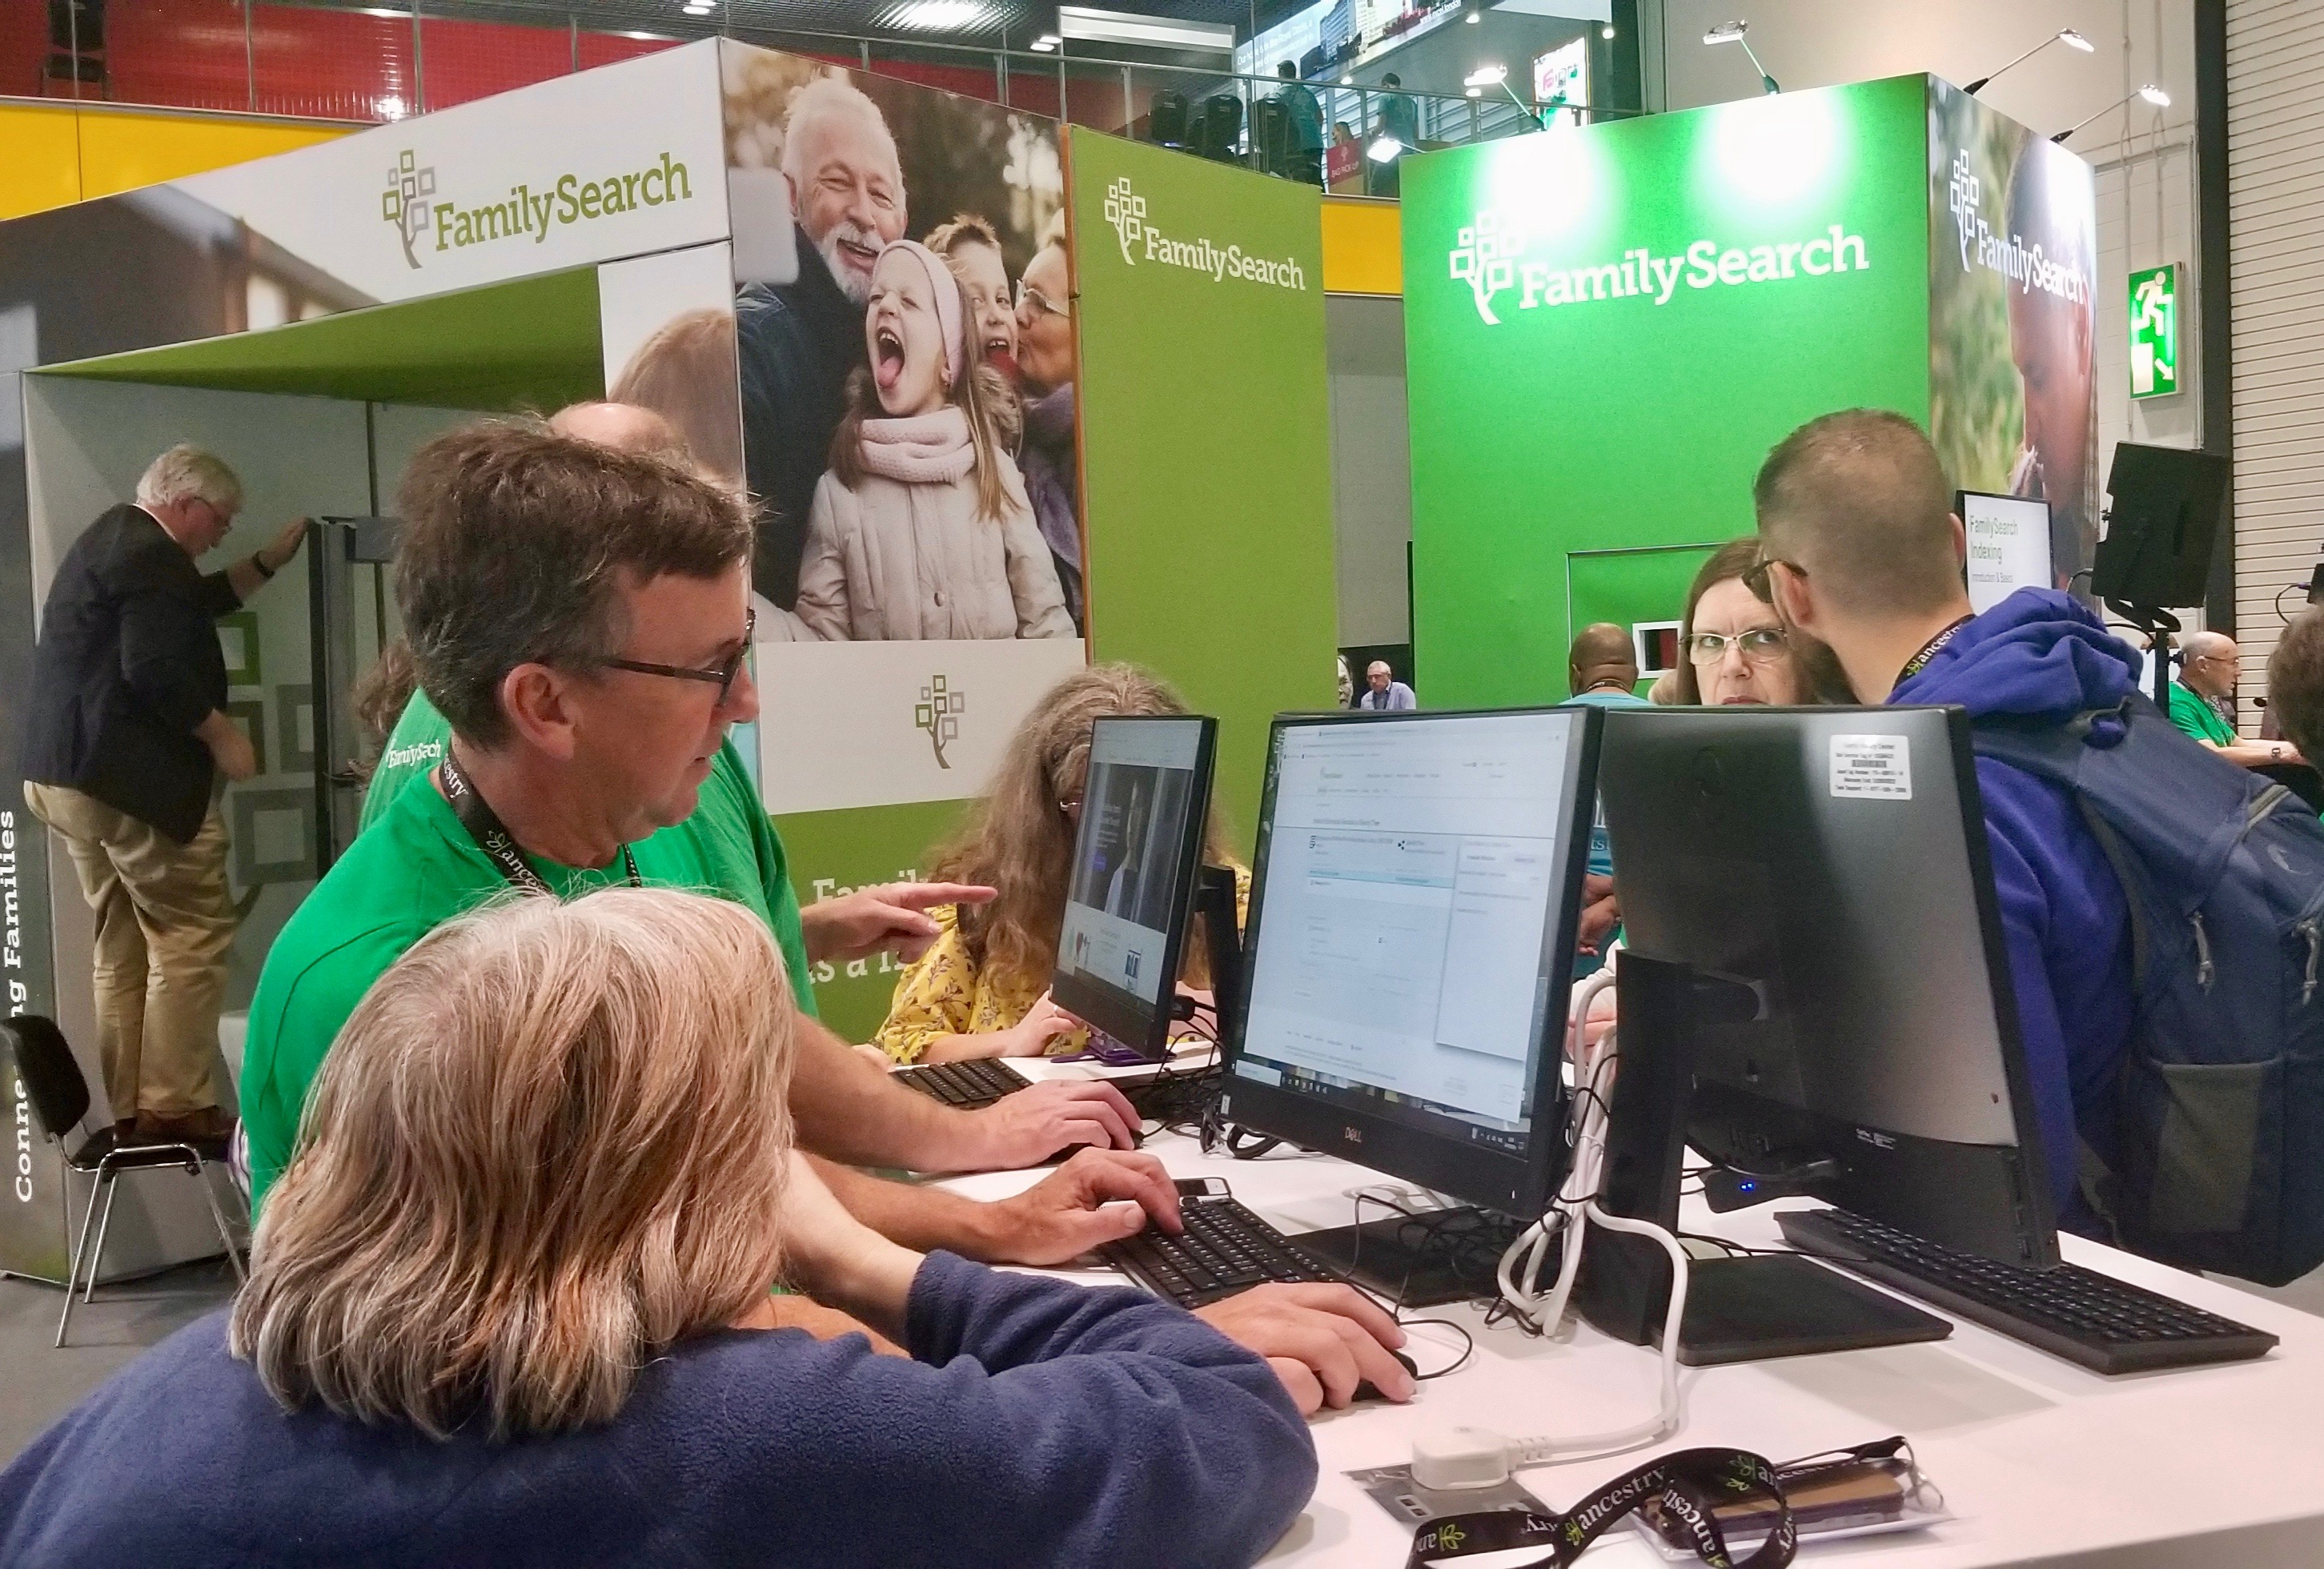 Attendees confer with staff at the FamilySearch booth in the RootsTech London exhibition area at London ExCel convention center on Thursday, Oct. 24, 2019.